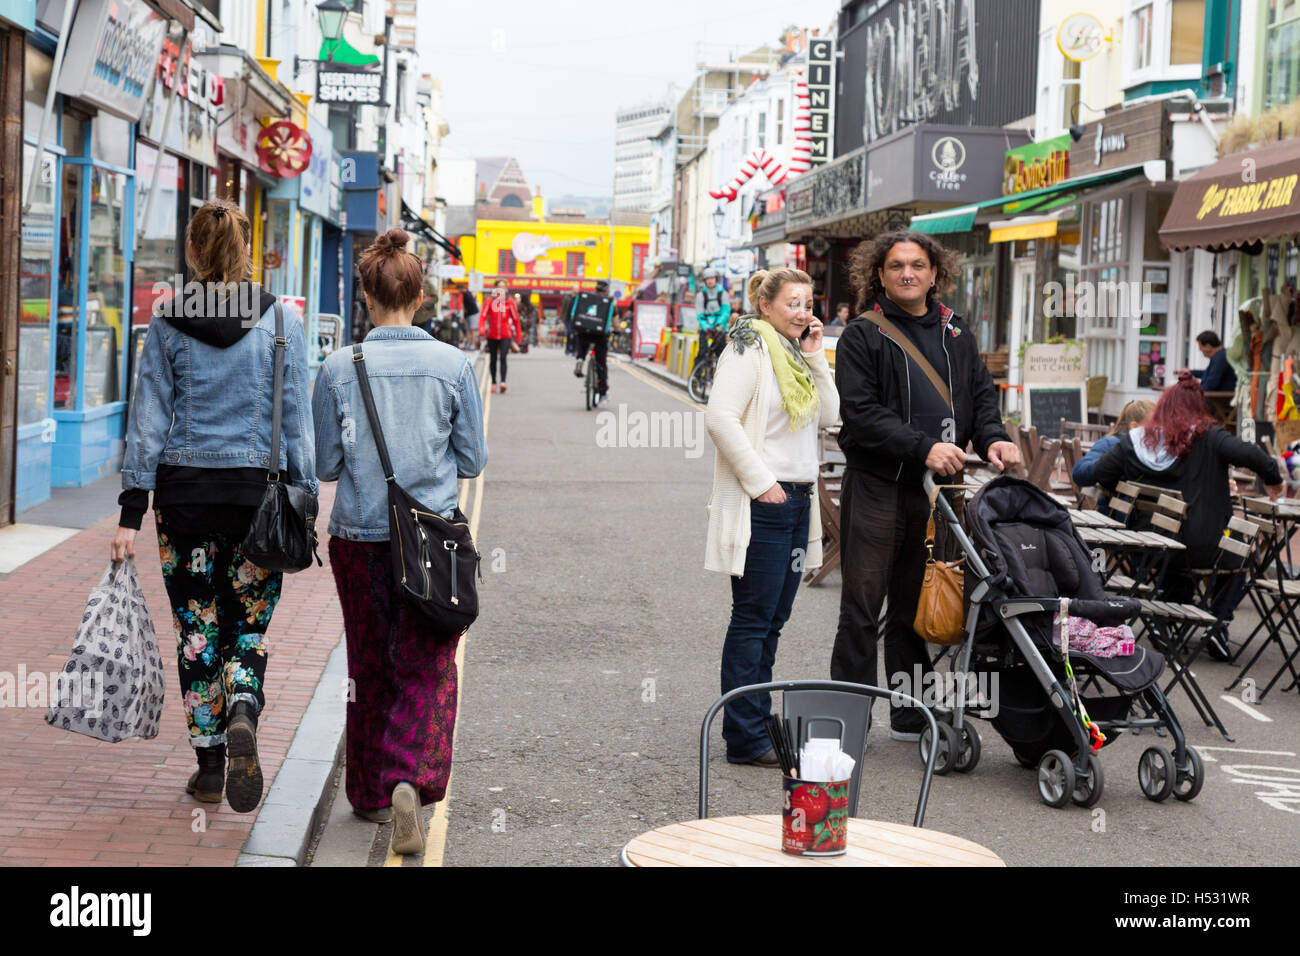 People shopping in The Lanes, Brighton, East Sussex England UK Stock Photo